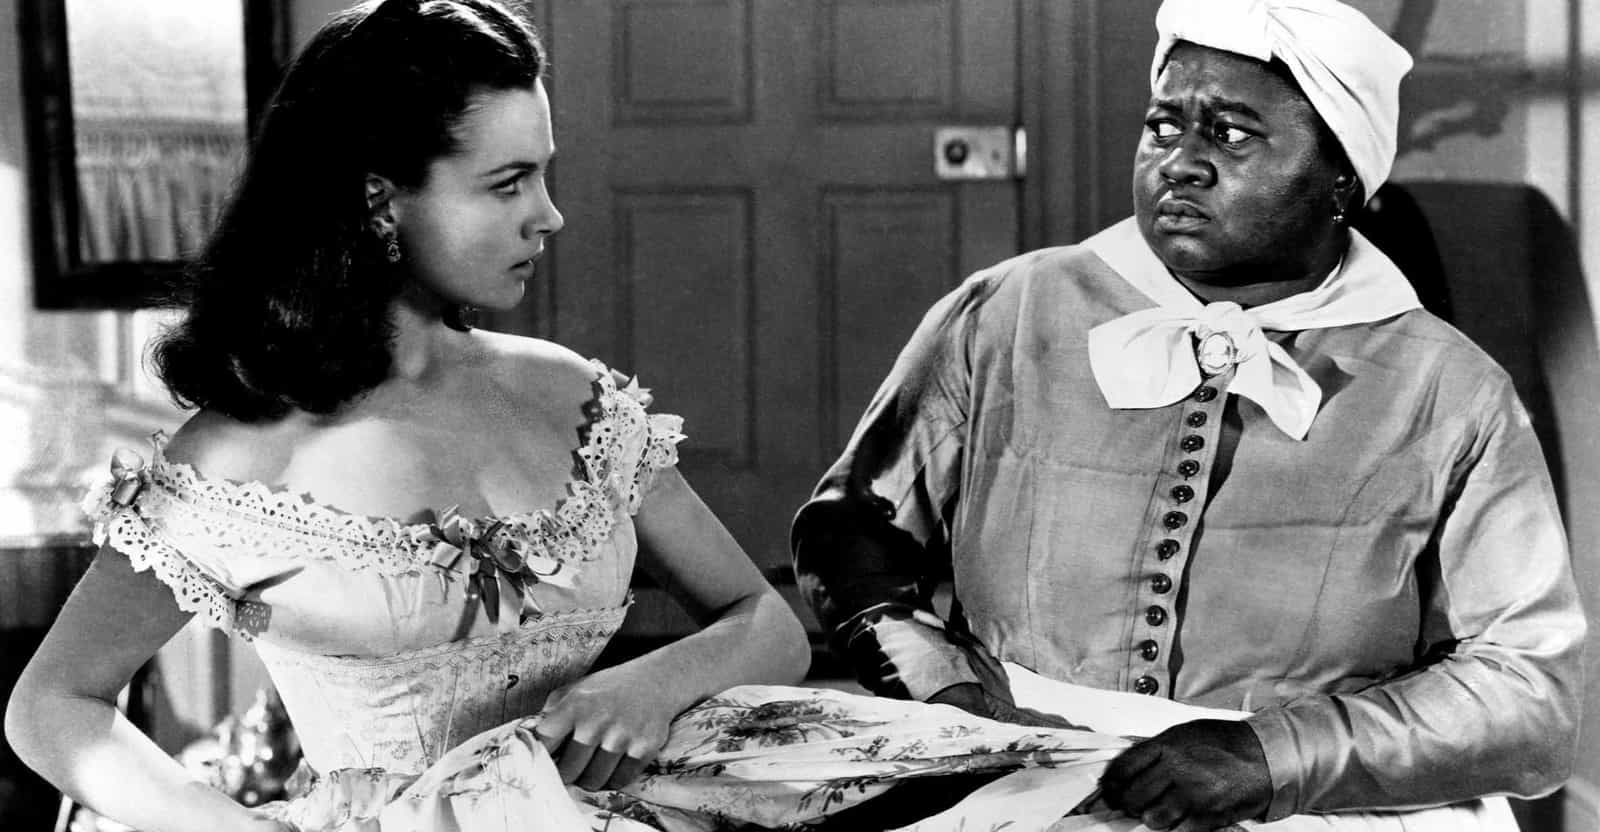 Dark Tales From Behind The Scenes Of 'Gone with the Wind'